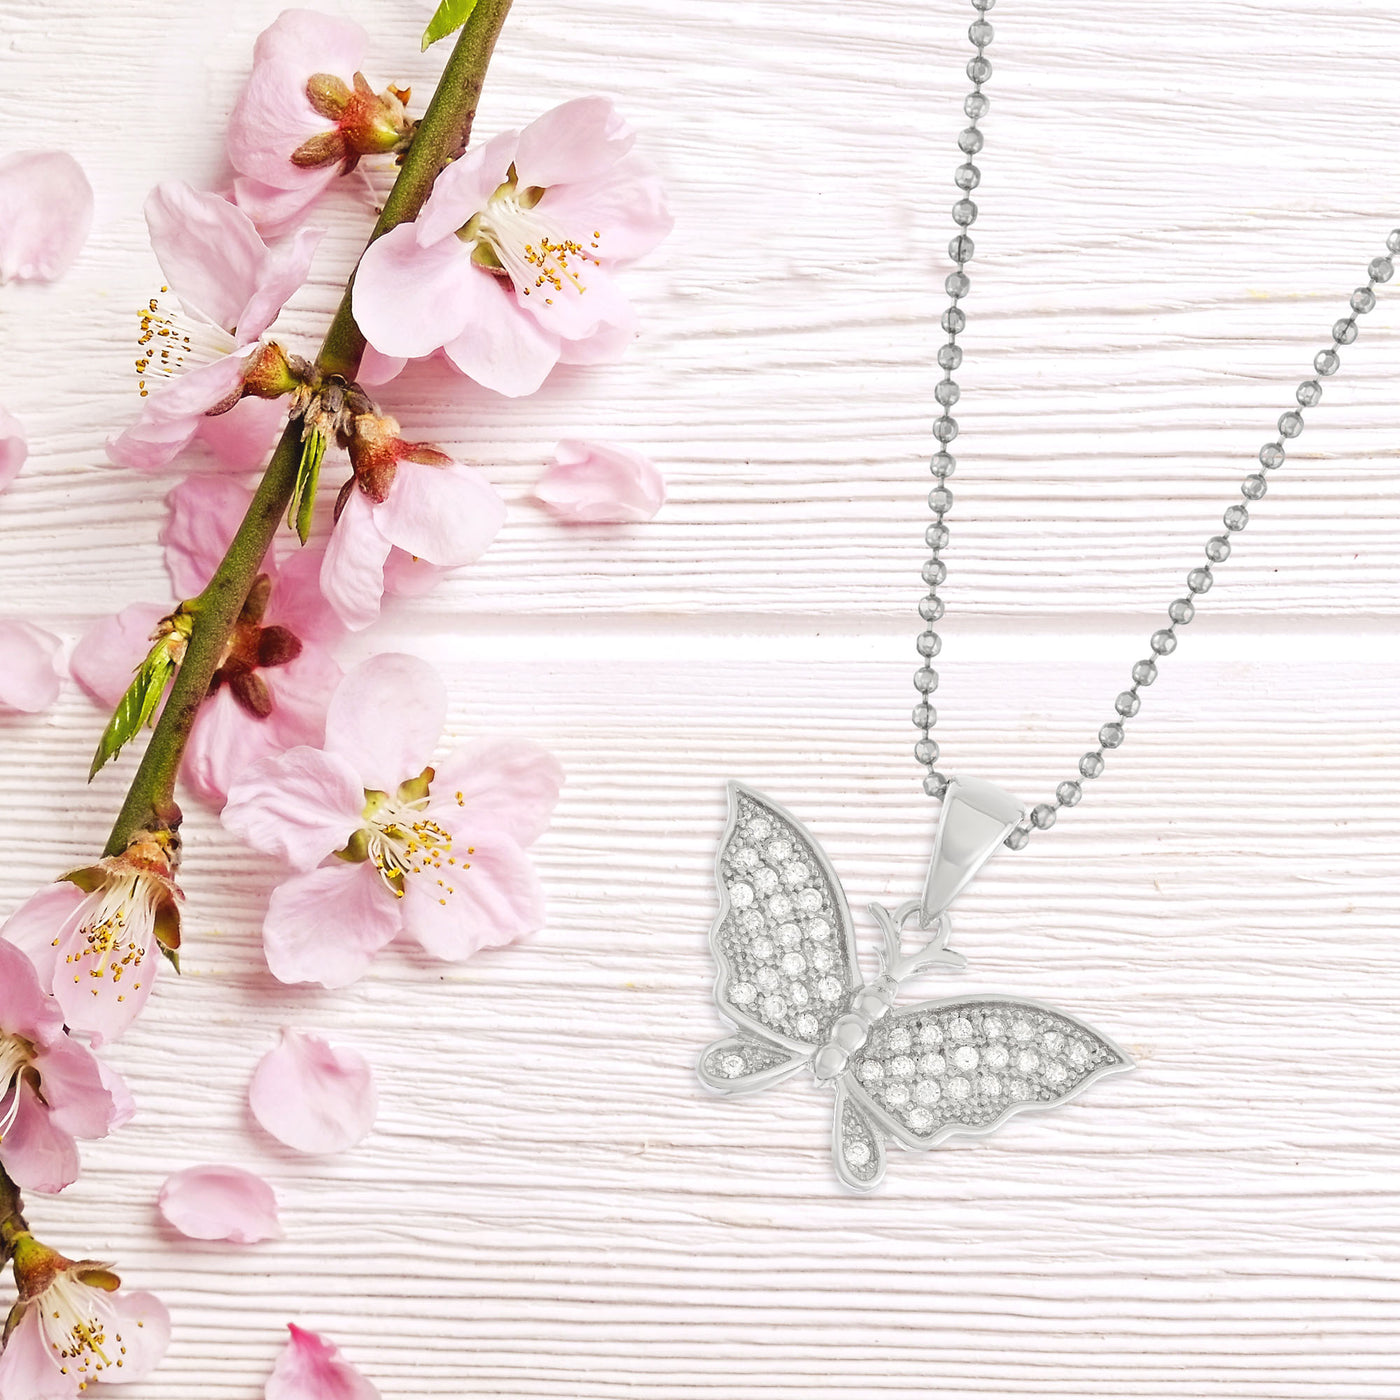 Majestic Butterfly Pendant With Cz Stones